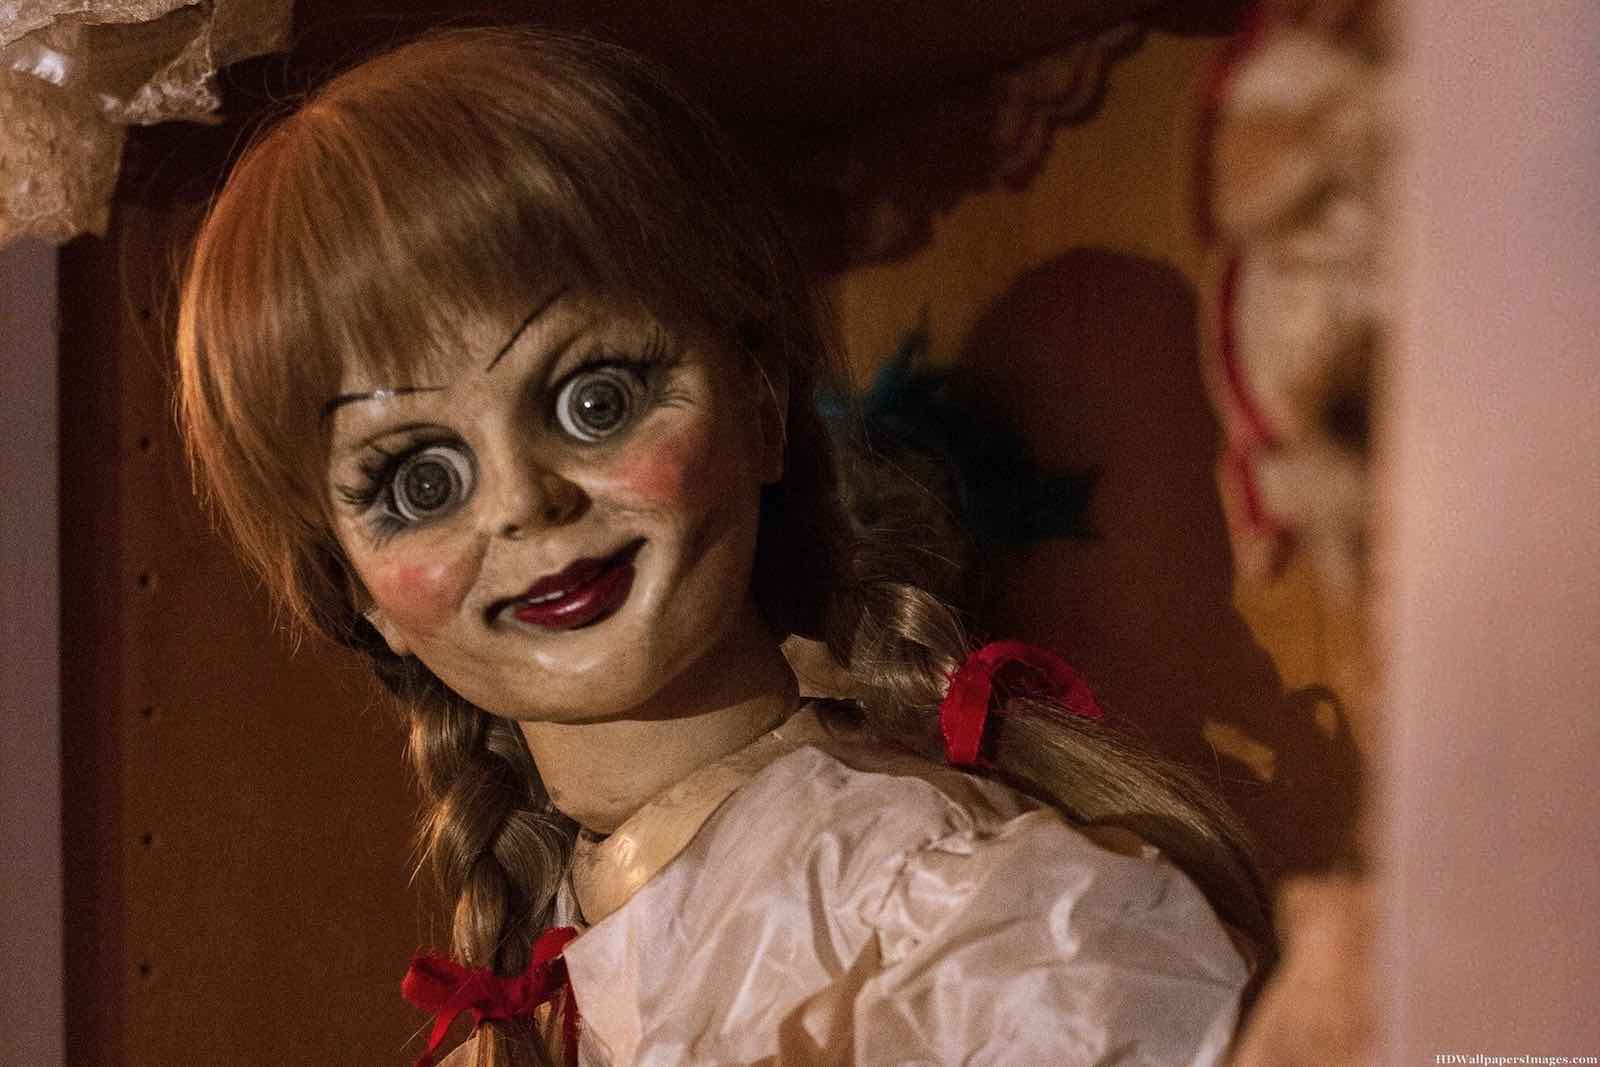 actual annabelle doll